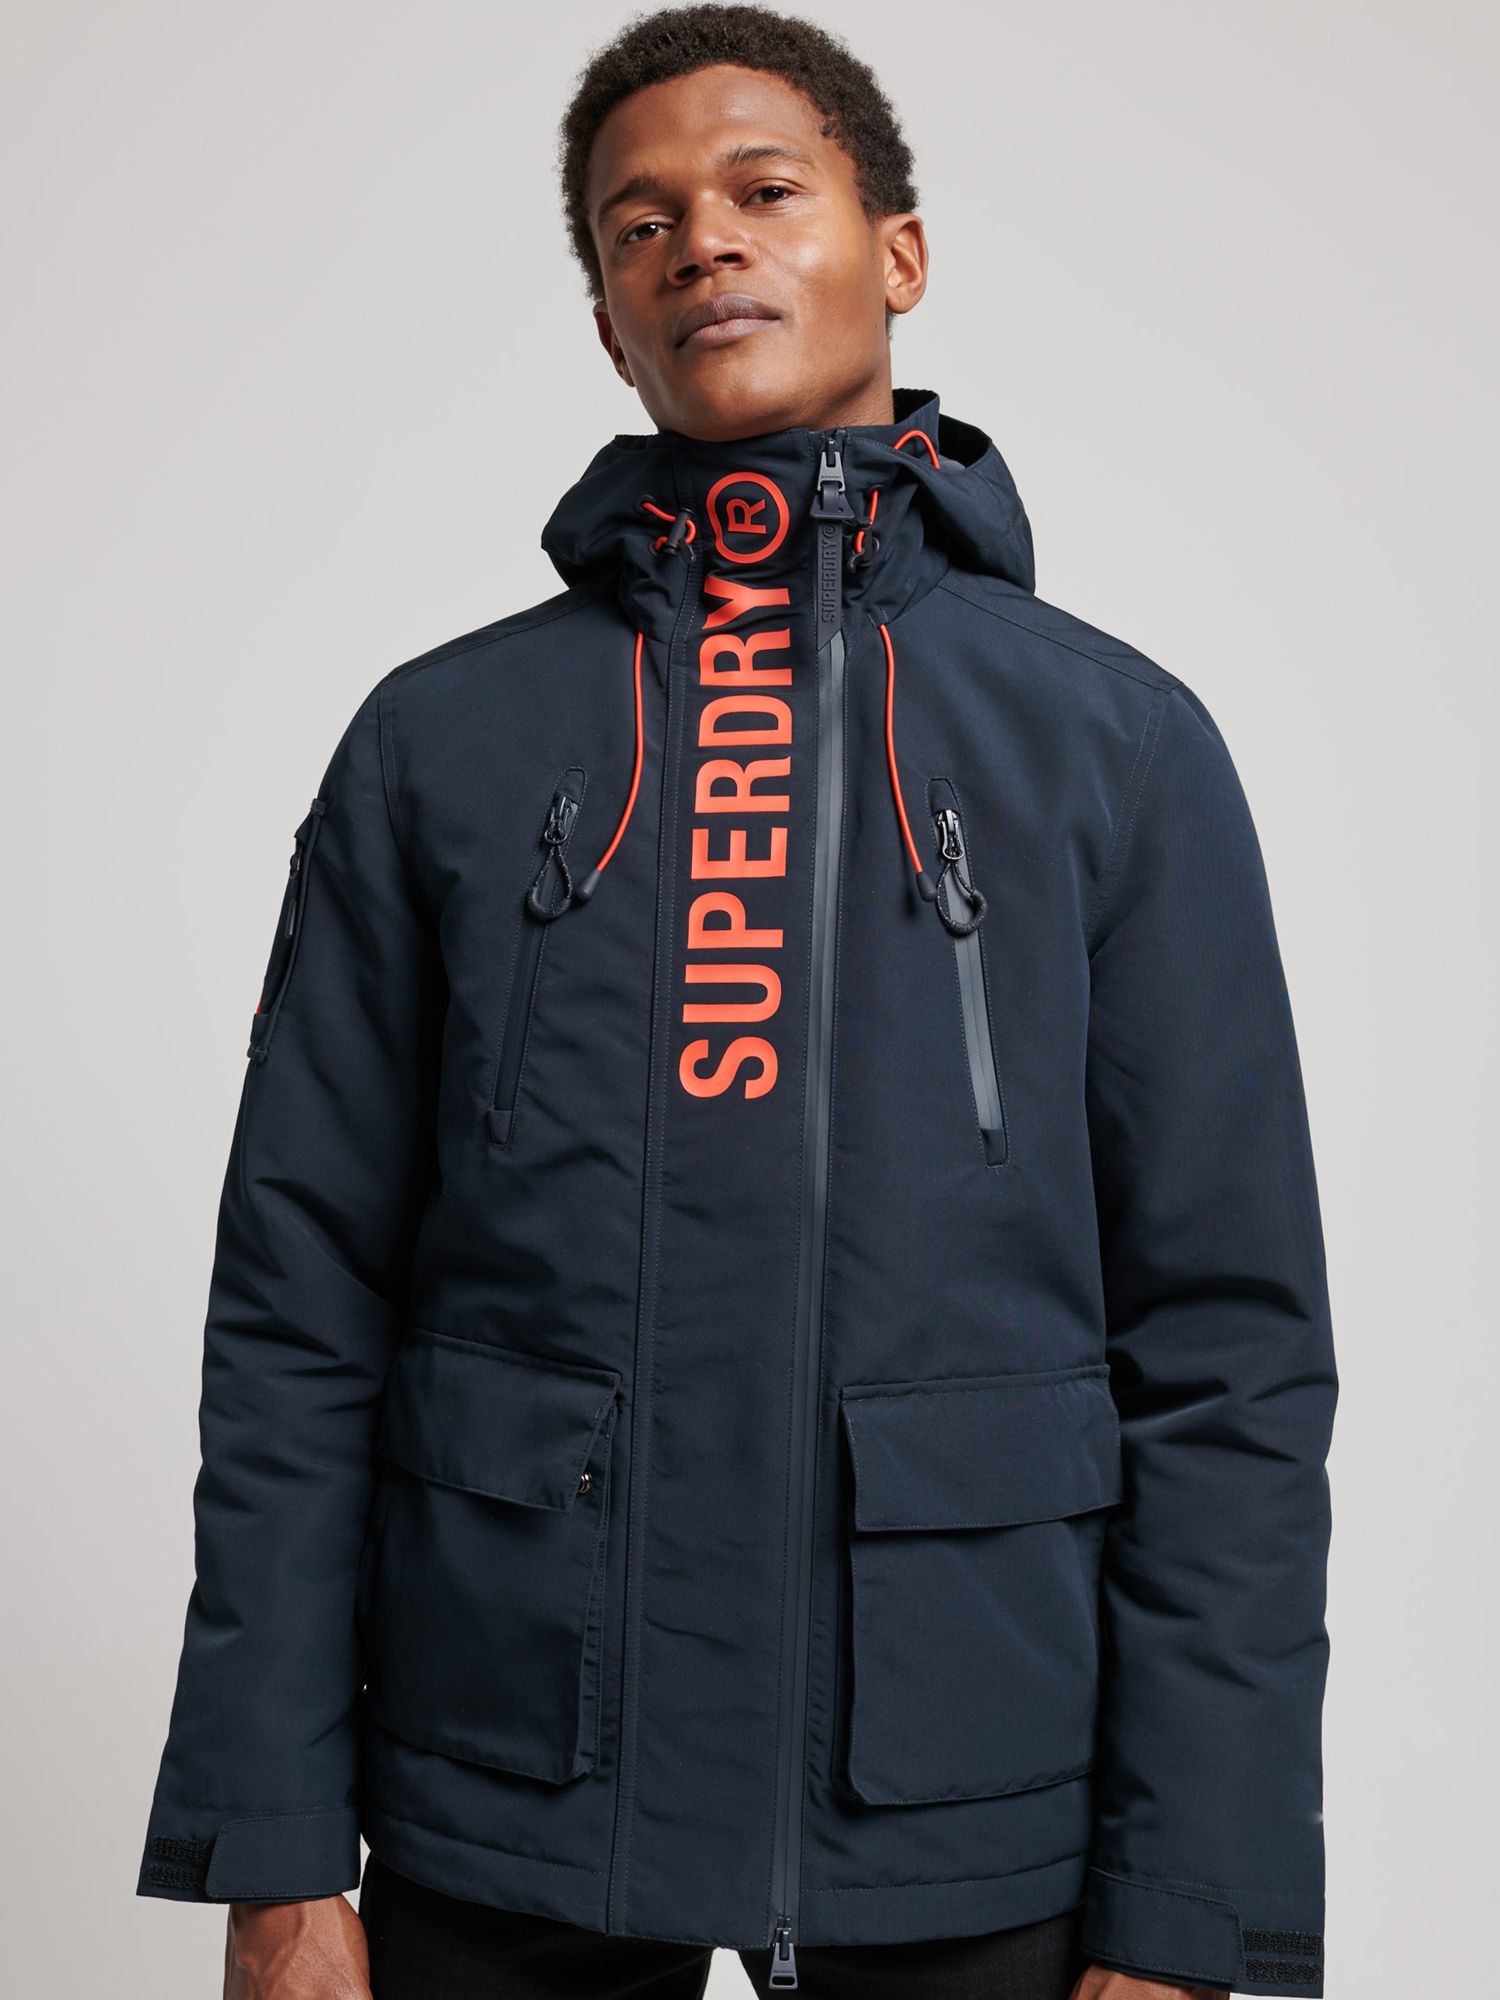 Superdry Ultimate SD Windcheater Jacket at John Lewis & Partners